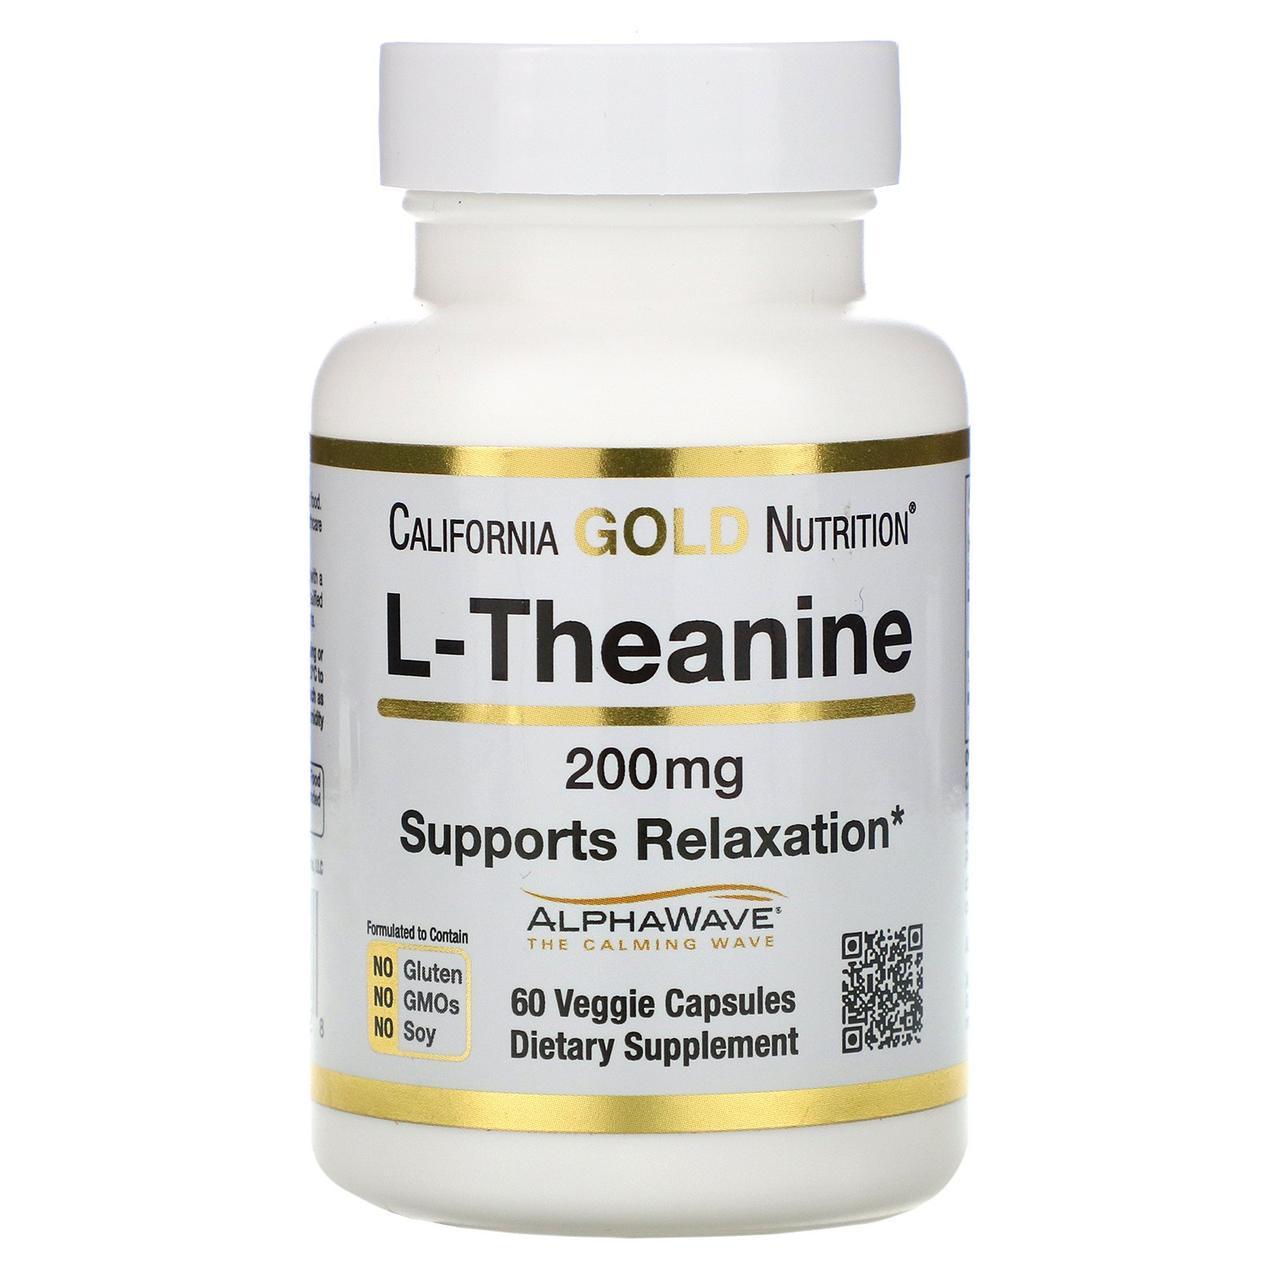 California Gold Nutrition L-Theanine 200 mg 60 Caps,  мл, California Gold Nutrition. Спец препараты. 